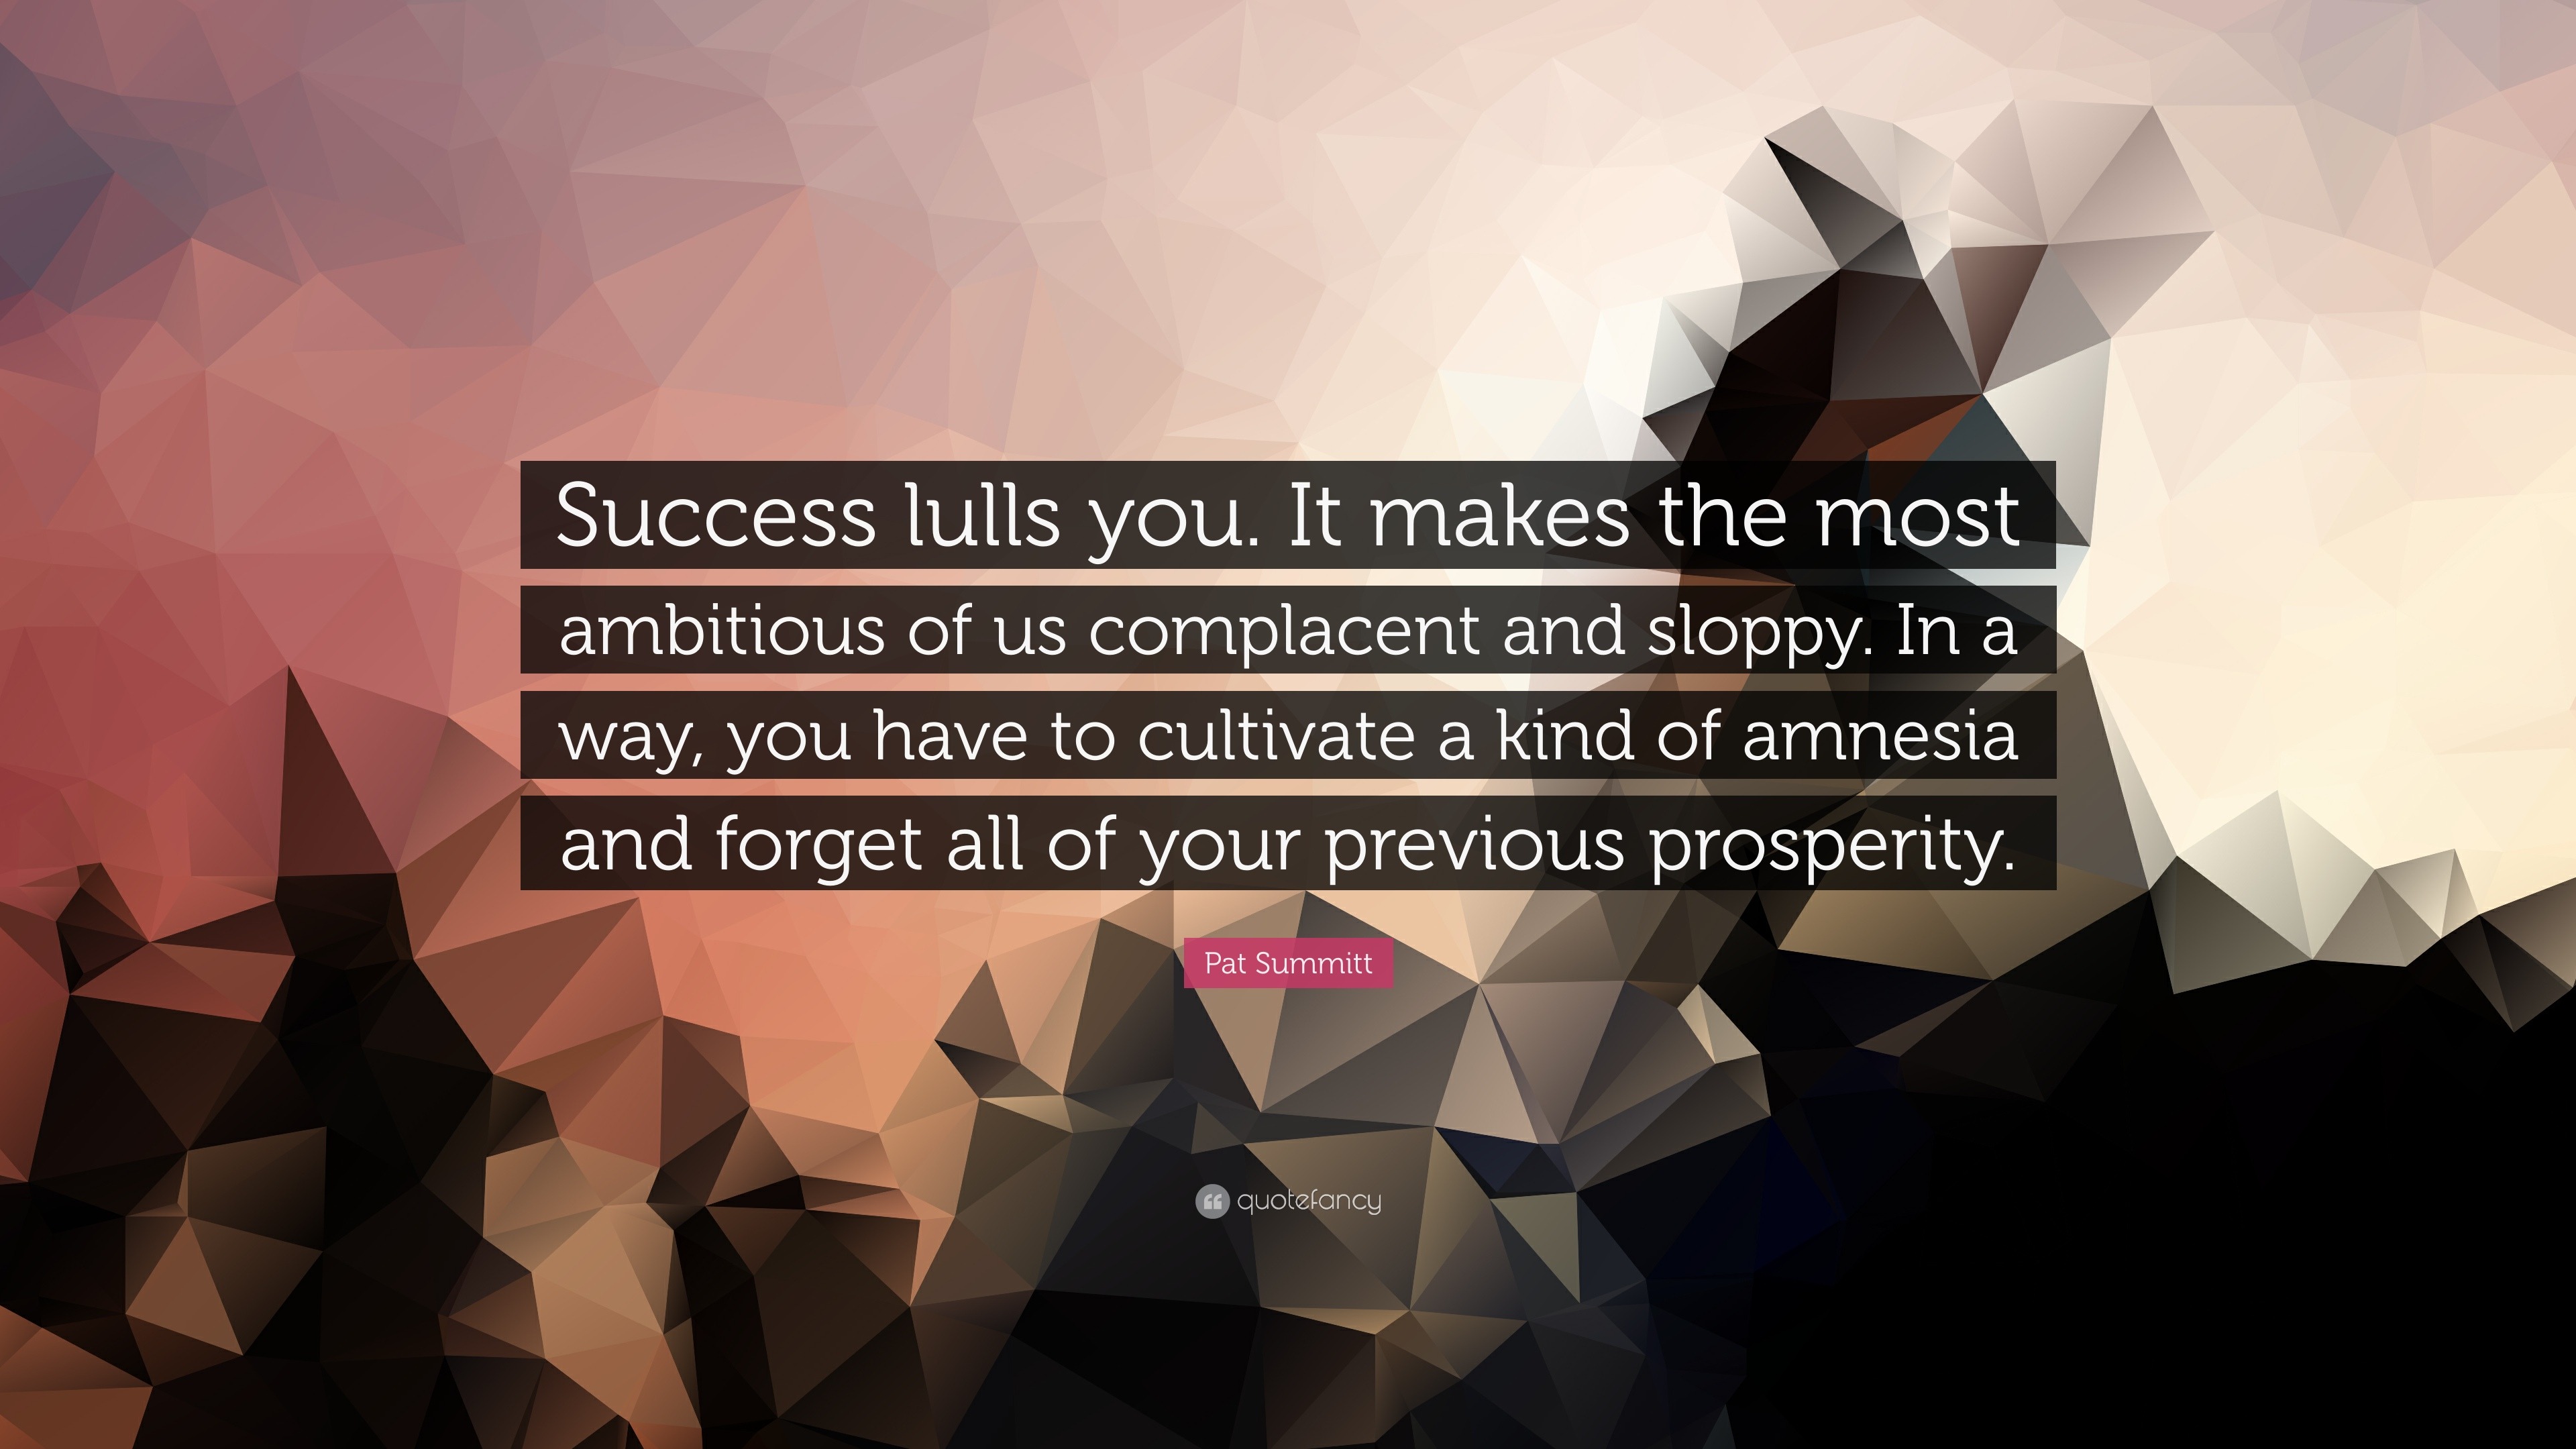 Pat Summitt Quote: “Success lulls you. It makes the most ambitious of ...